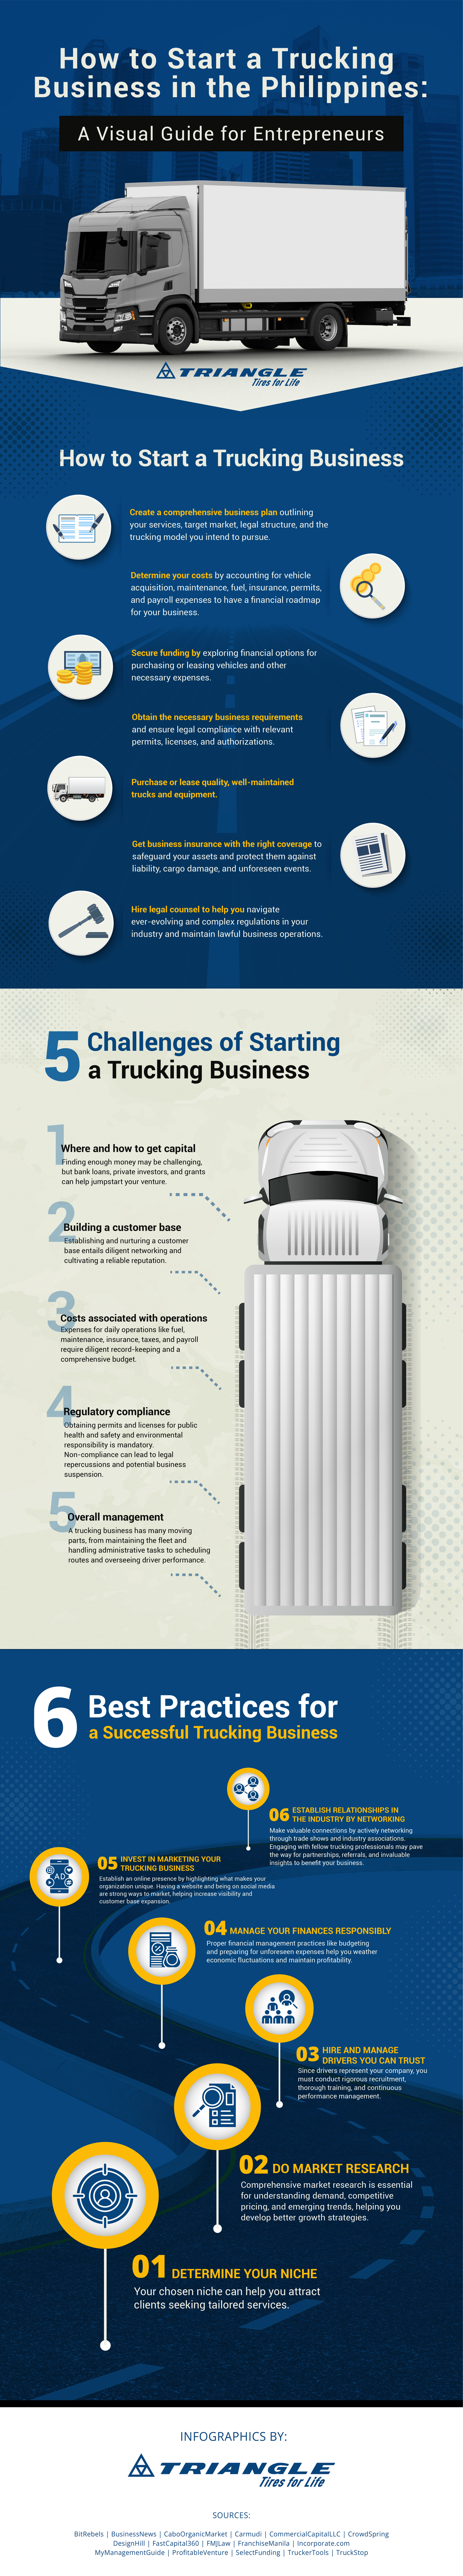 How to Start a Trucking Business in the Philippines: A Visual Guide for Entrepreneurs Infographic